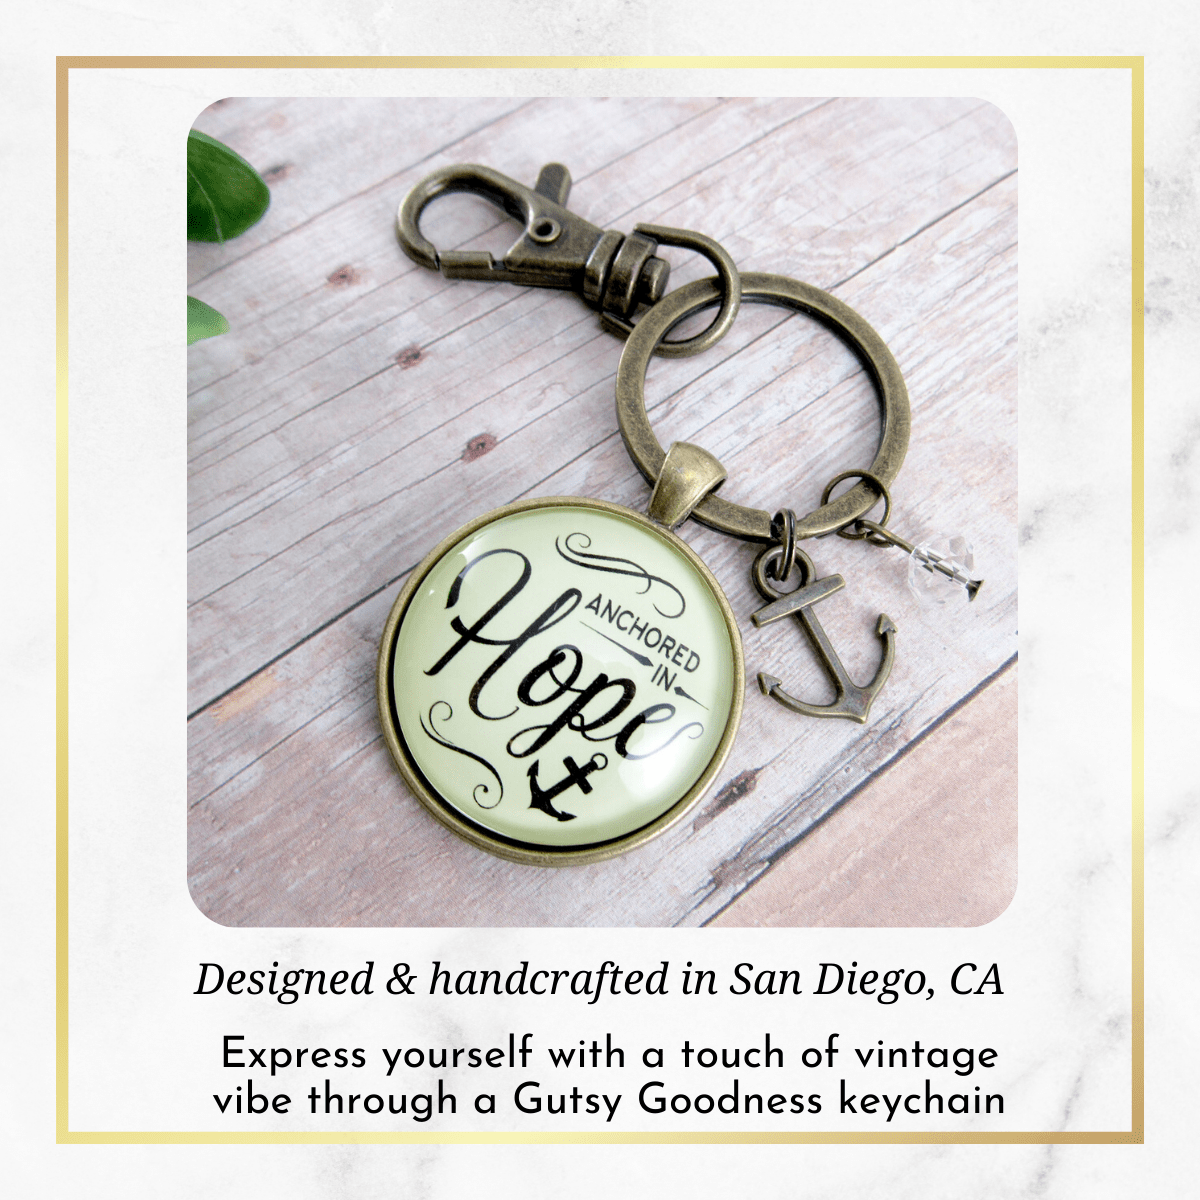 Anchored in Hope Keychain Nautical Theme Faith Words Determination Charm Jewelry - Gutsy Goodness